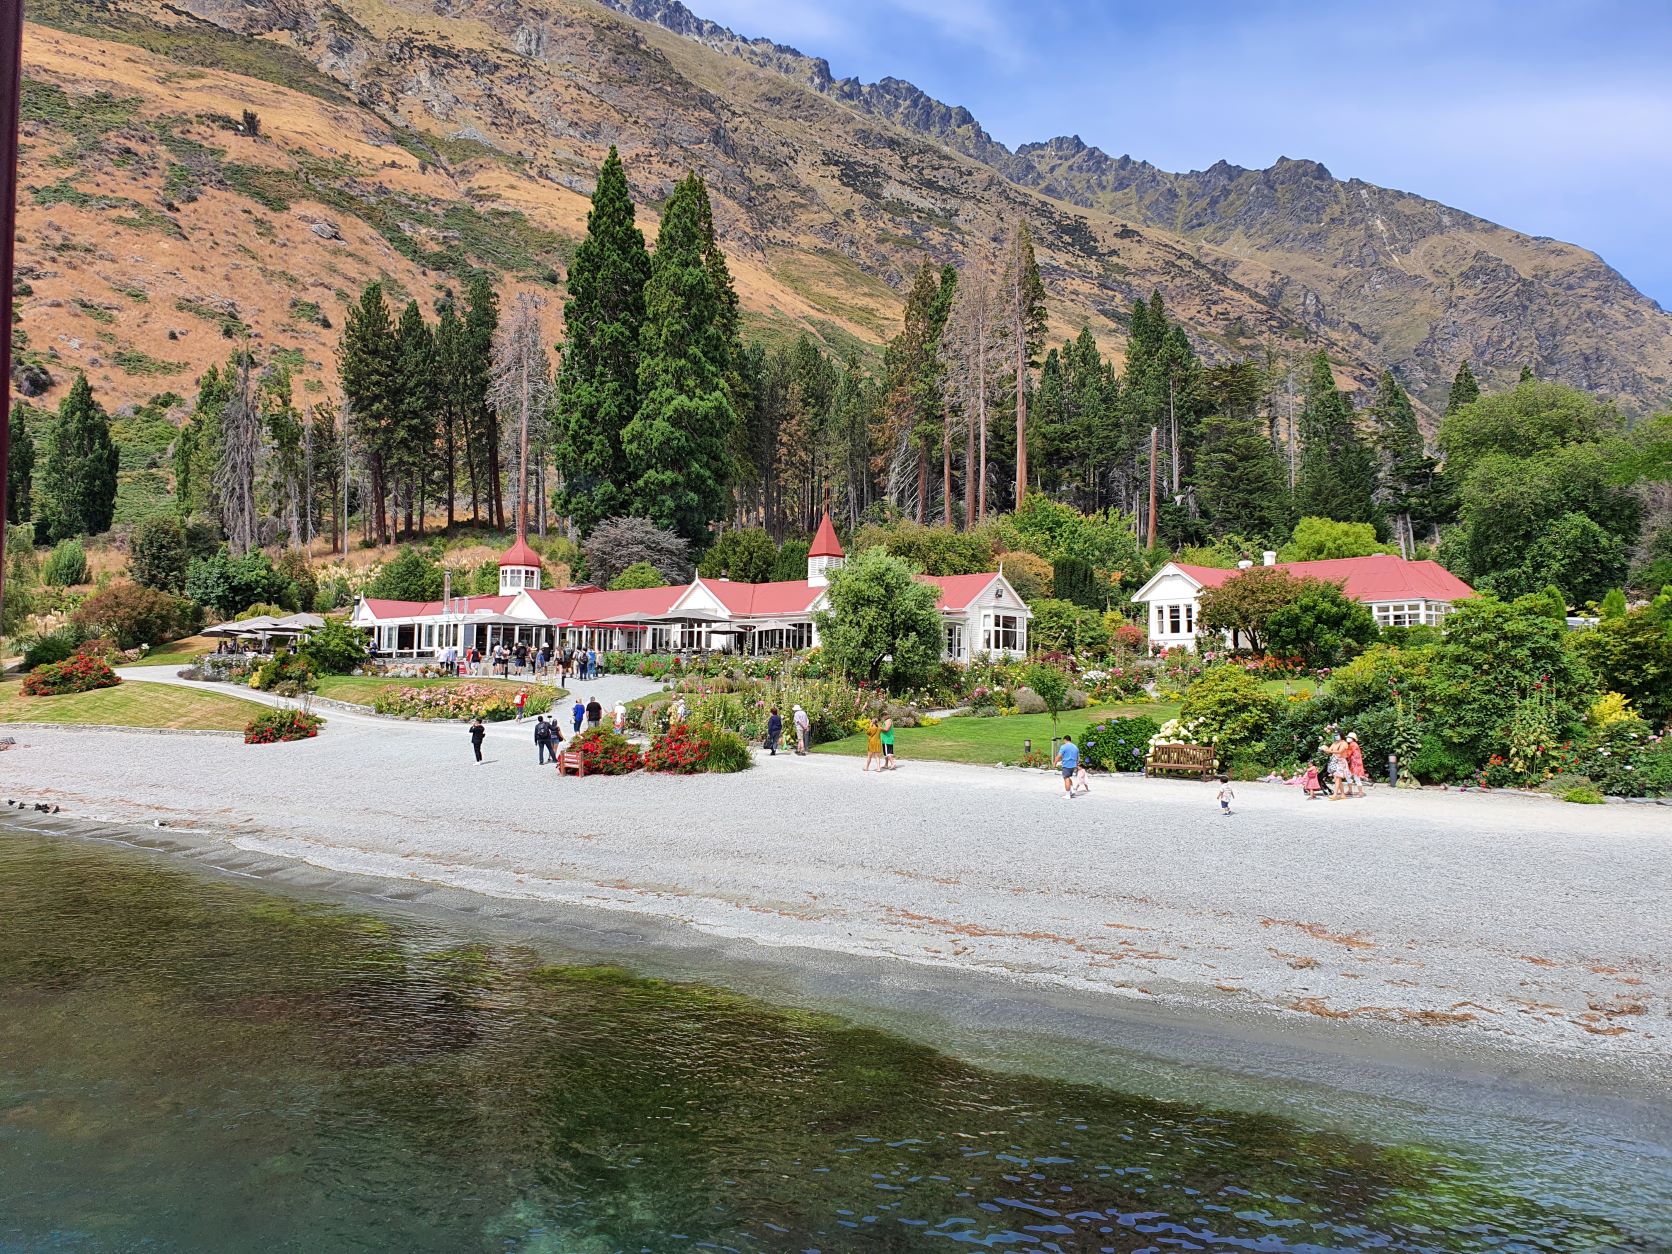 Walter Peak High Country Farm on the shores of Lake Wakatipu in Queenstown